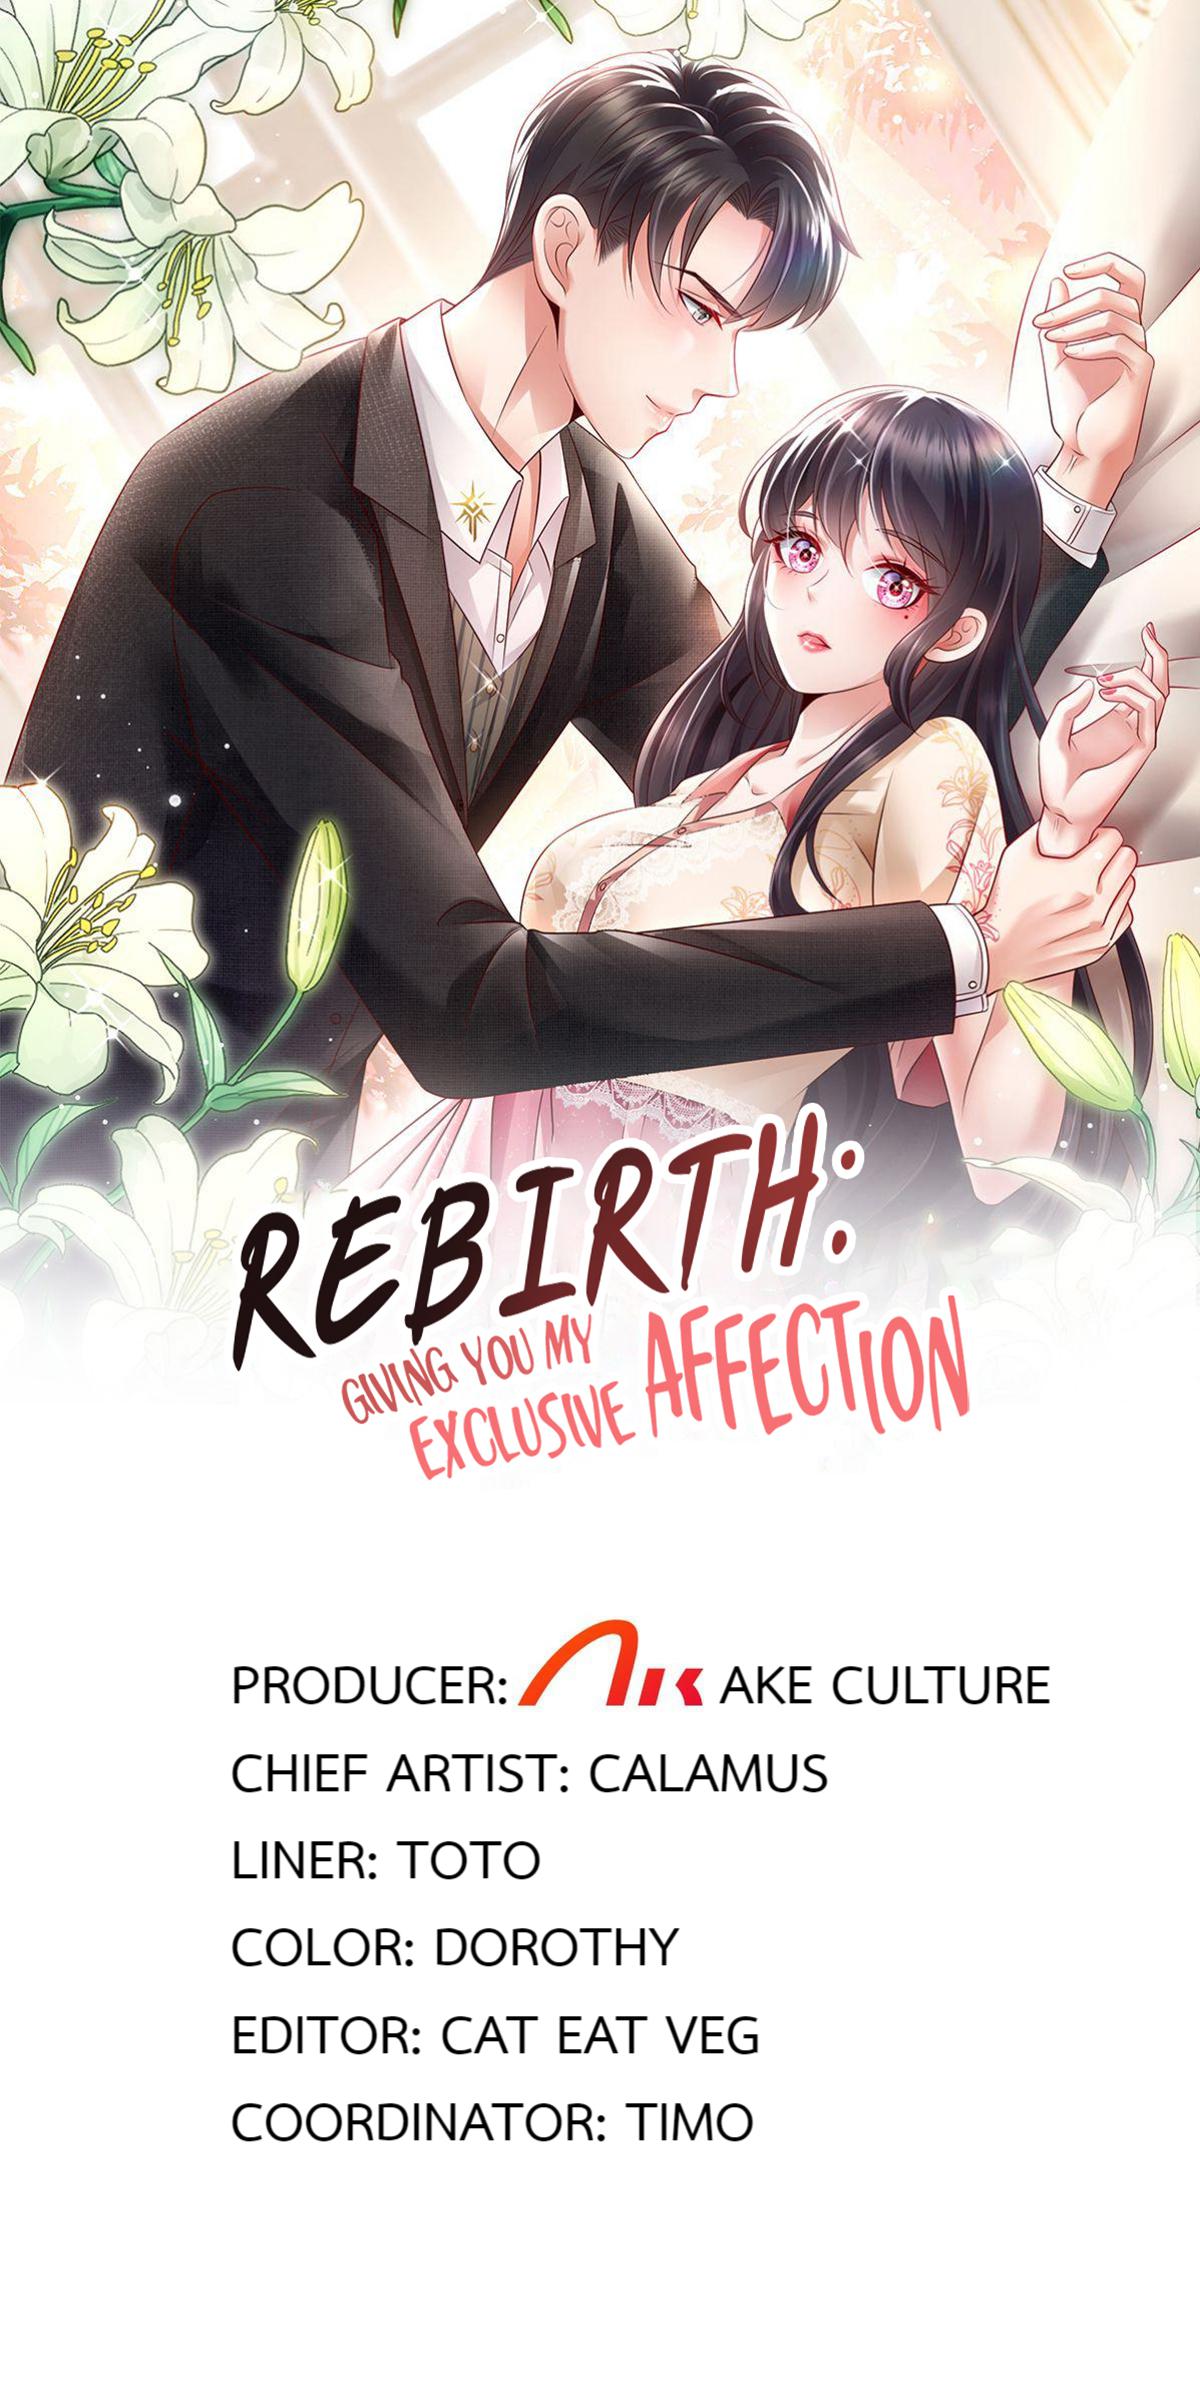 Rebirth: Giving You My Exclusive Affection 46.1 The Present Is Prepared